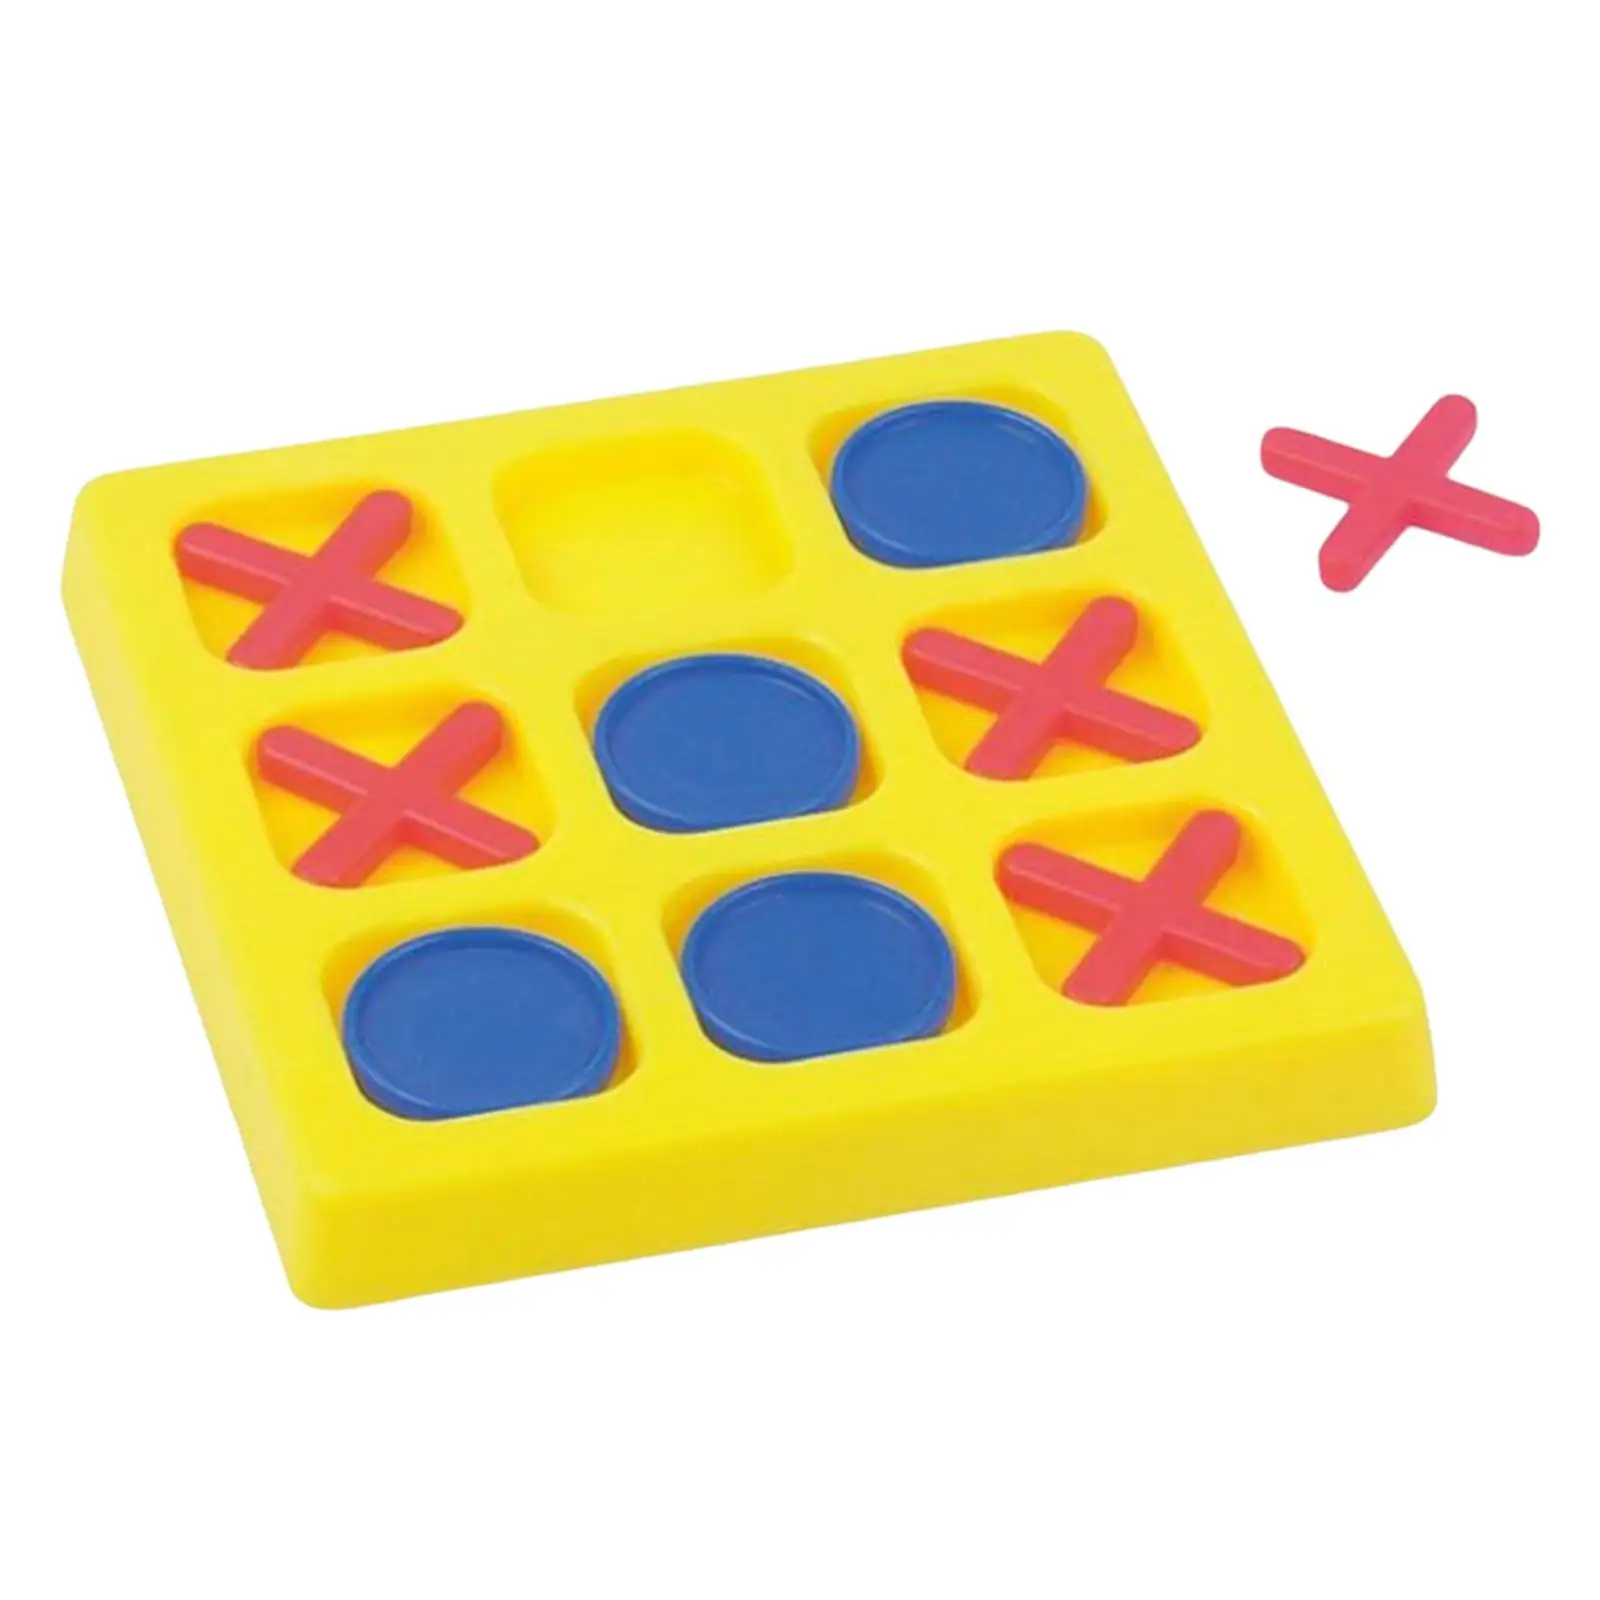 Puzzle Marble Solitaire Board Game Leisure IQ Puzzle Intelligent Tic TAC Toe O Chess for Backyard Entertainment Age 3+